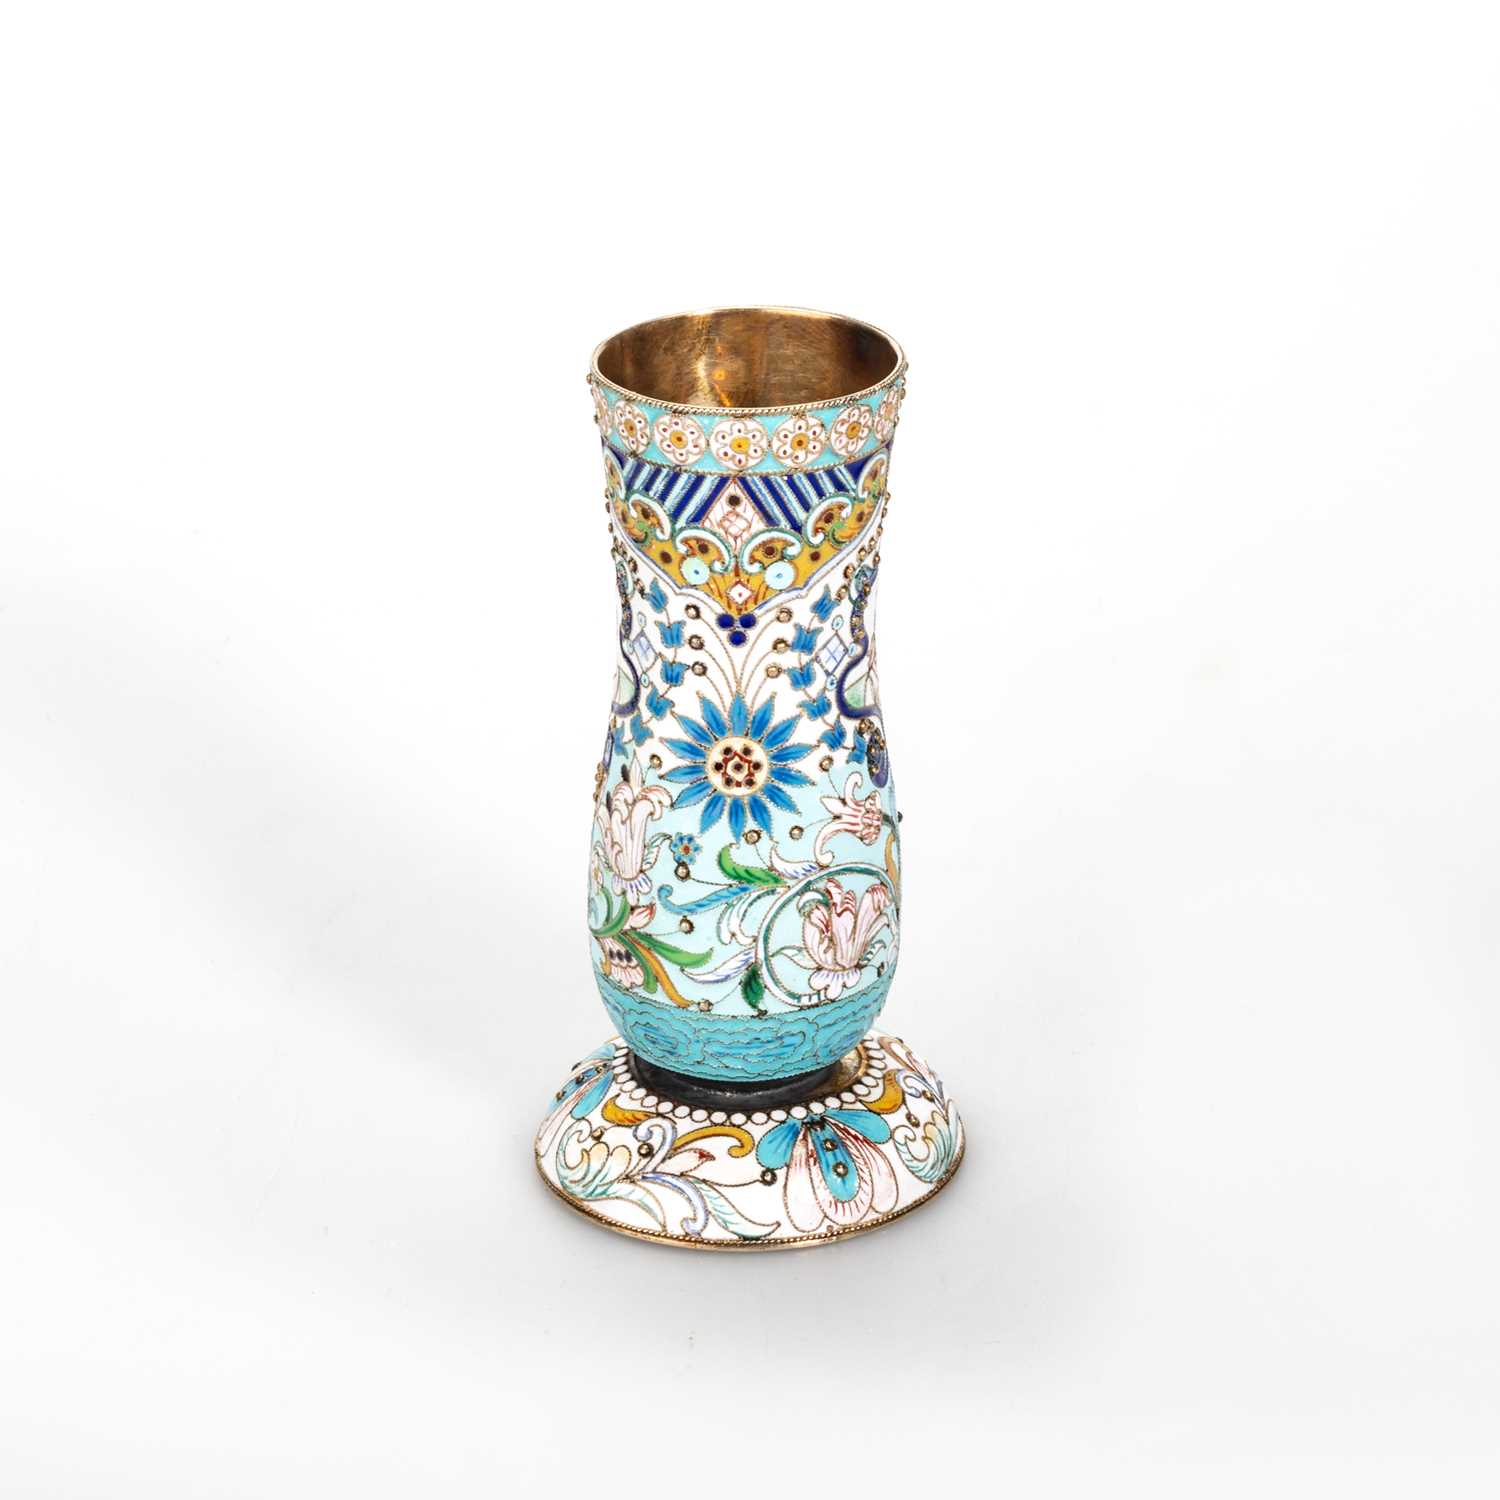 A RUSSIAN SILVER AND CLOISONNÉ ENAMEL VASE - Image 2 of 3